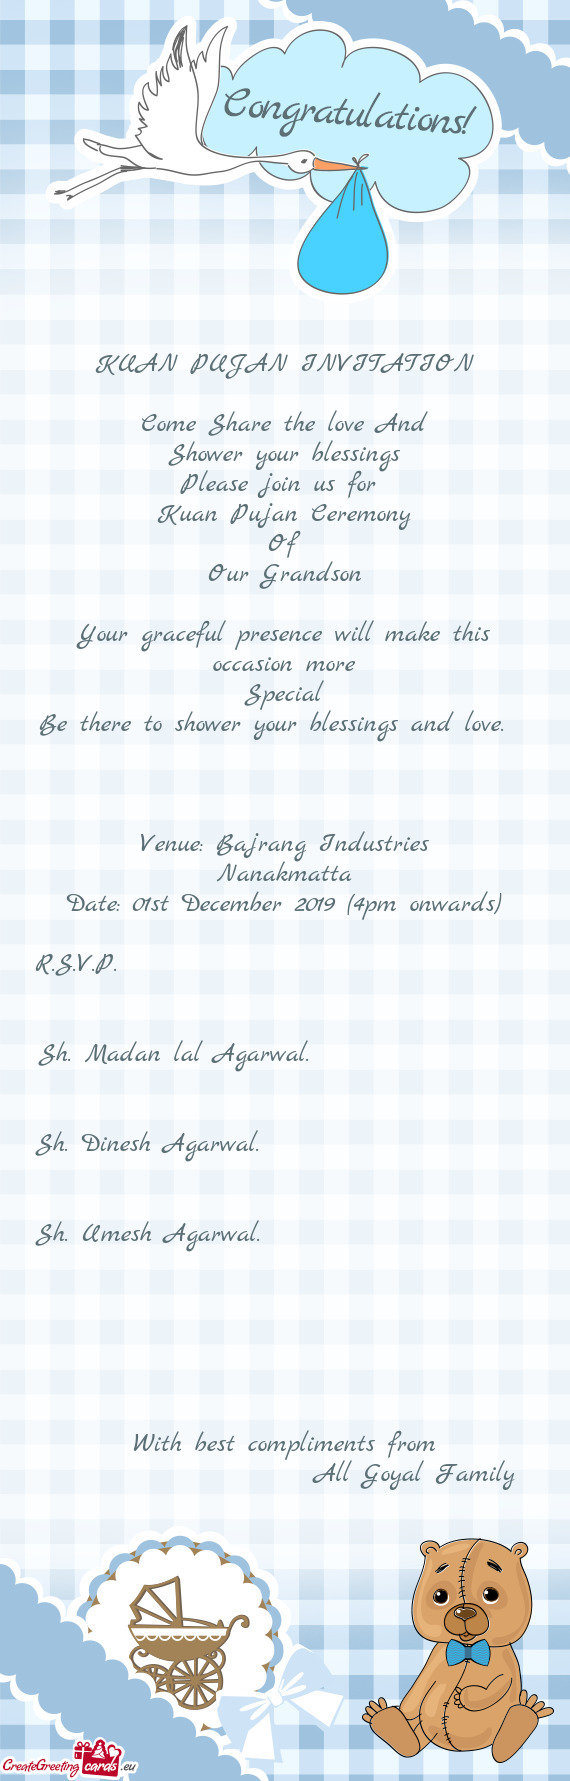 KUAN PUJAN INVITATION
 
 Come Share the love And
 Shower your blessings
 Please join us for 
 Kuan P